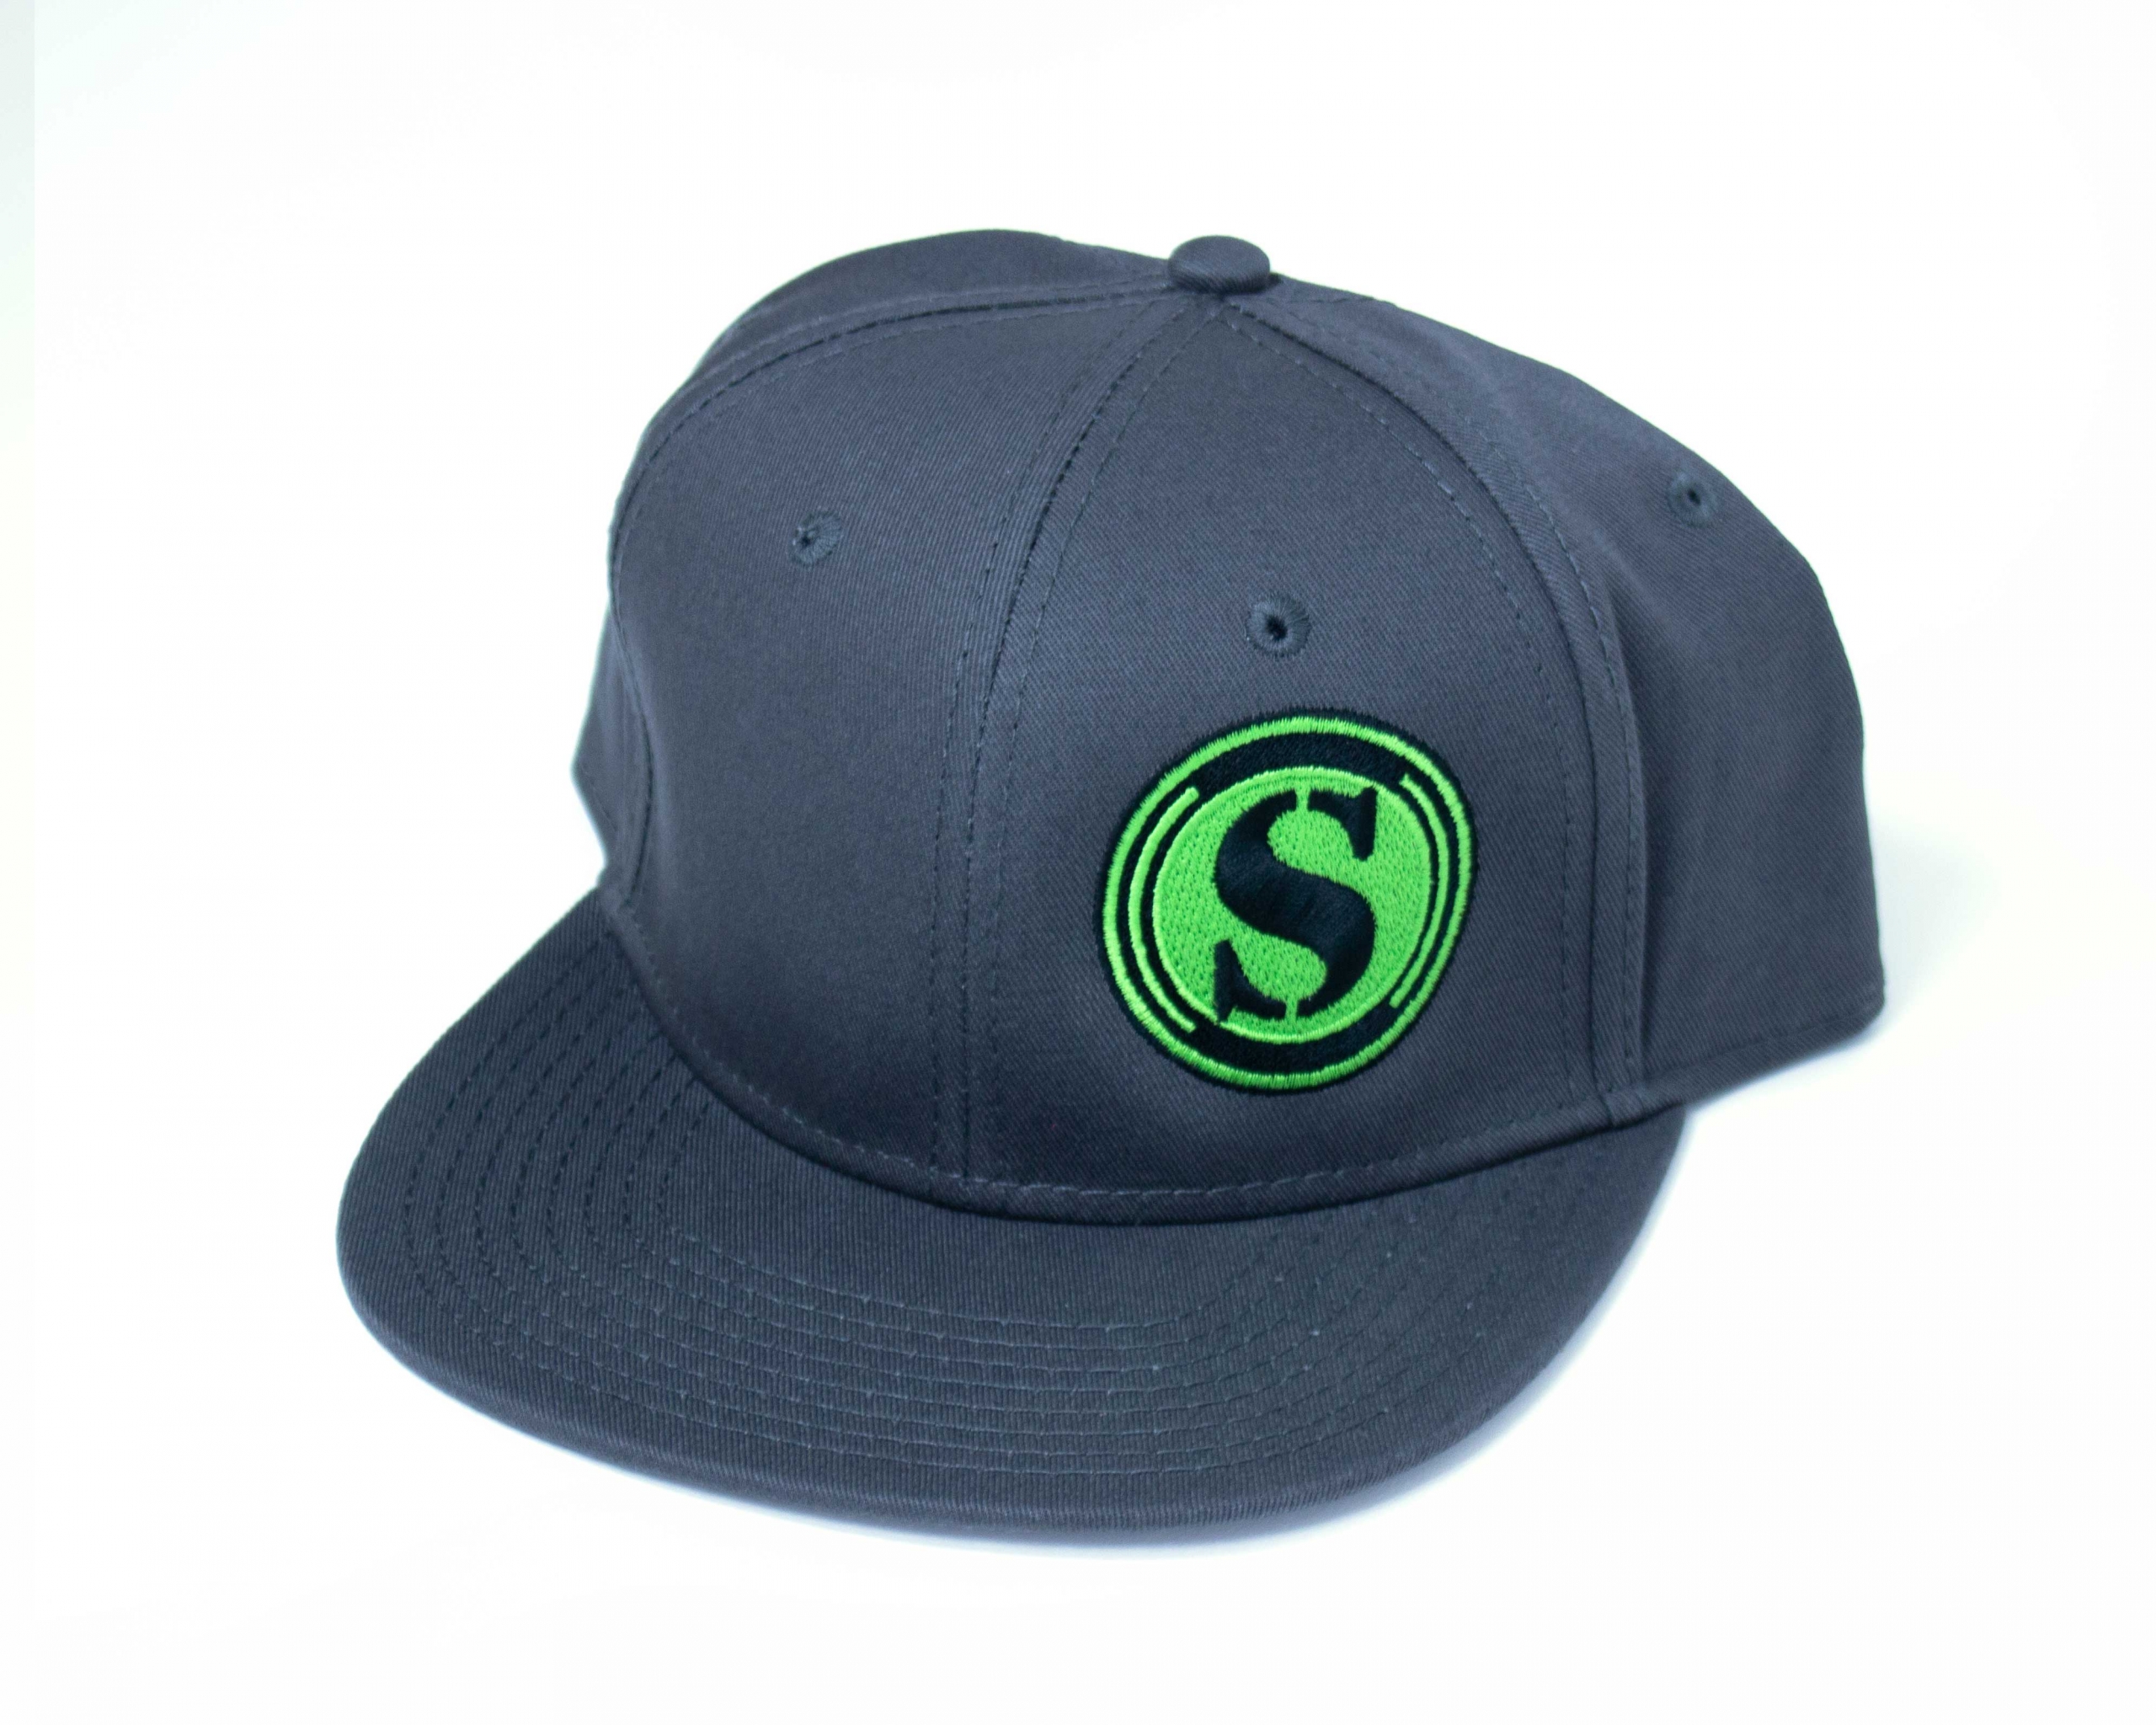 Sikky Pro-Style Wool Blend Snapback Cap